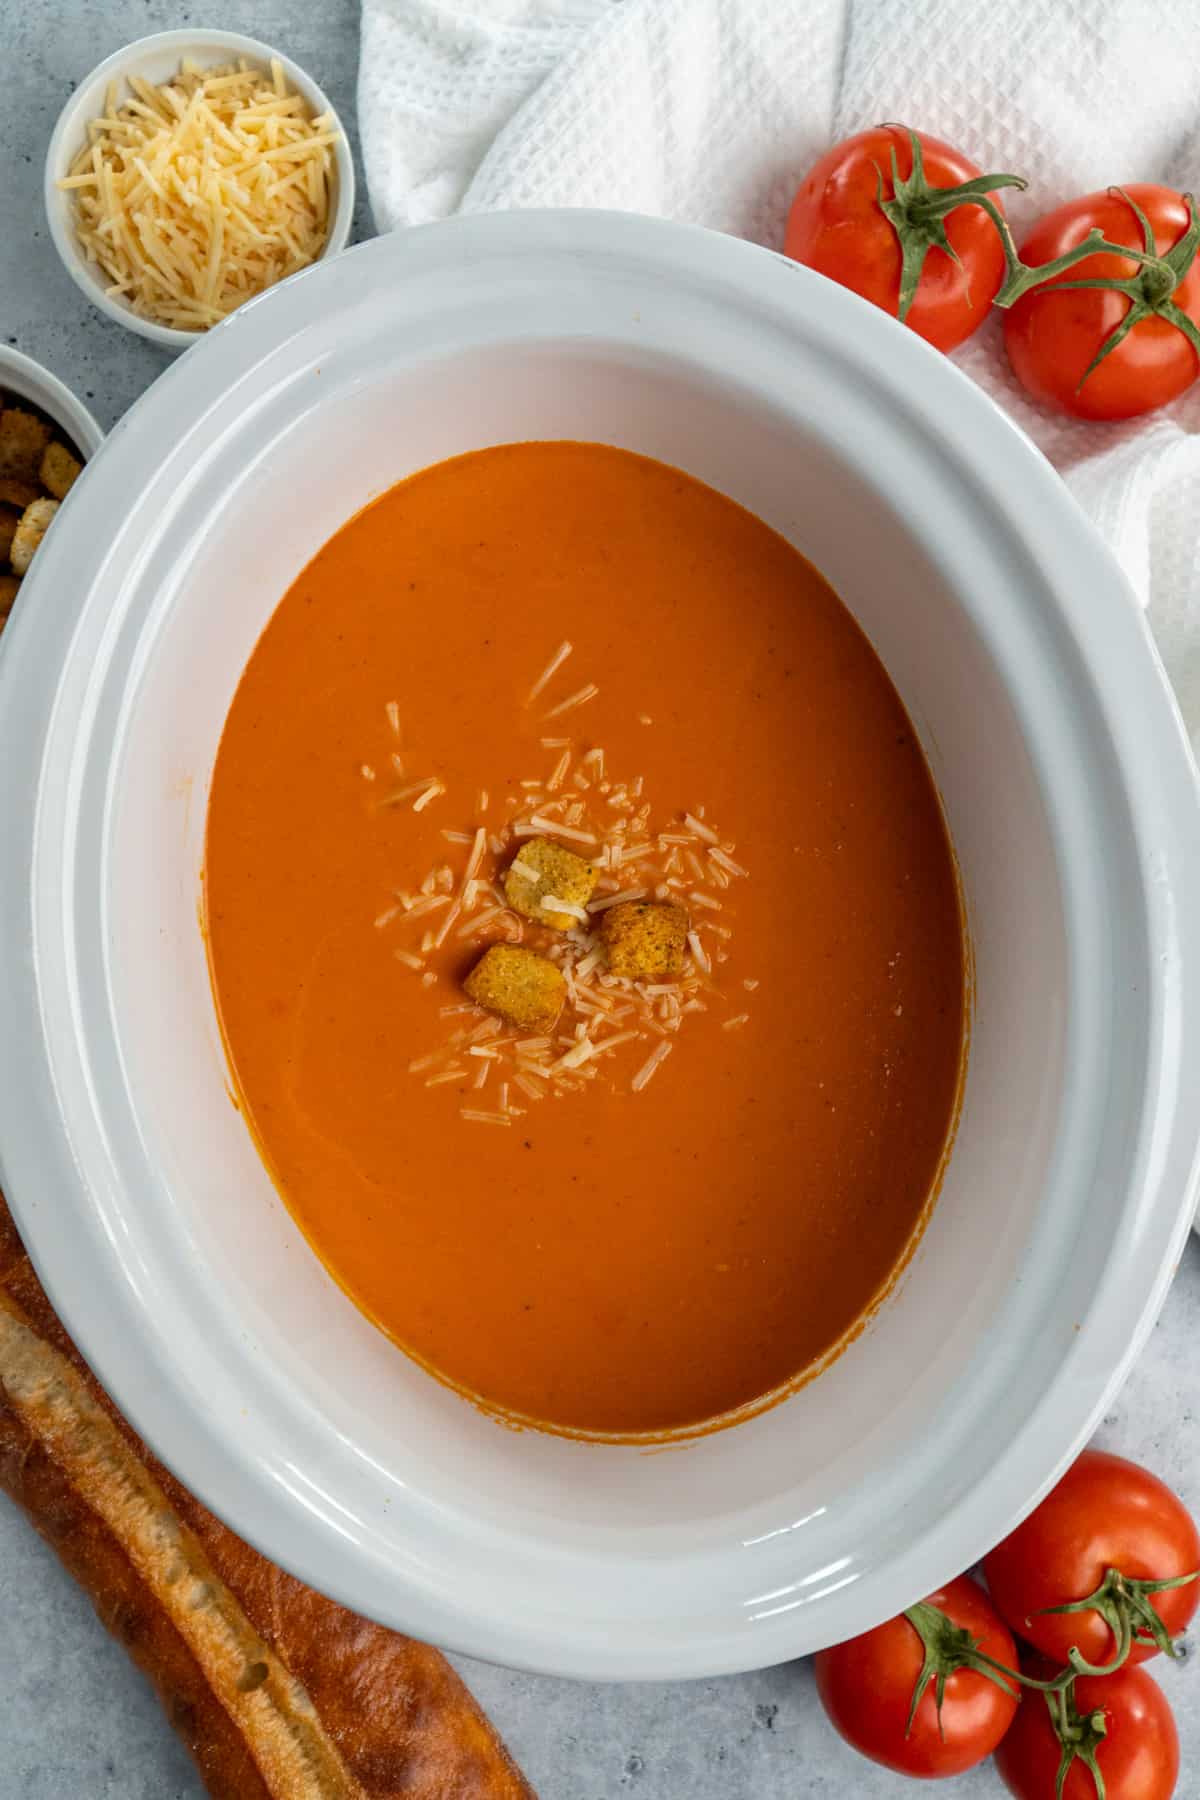 Overhead look at tomato soup in a white slow cooker.